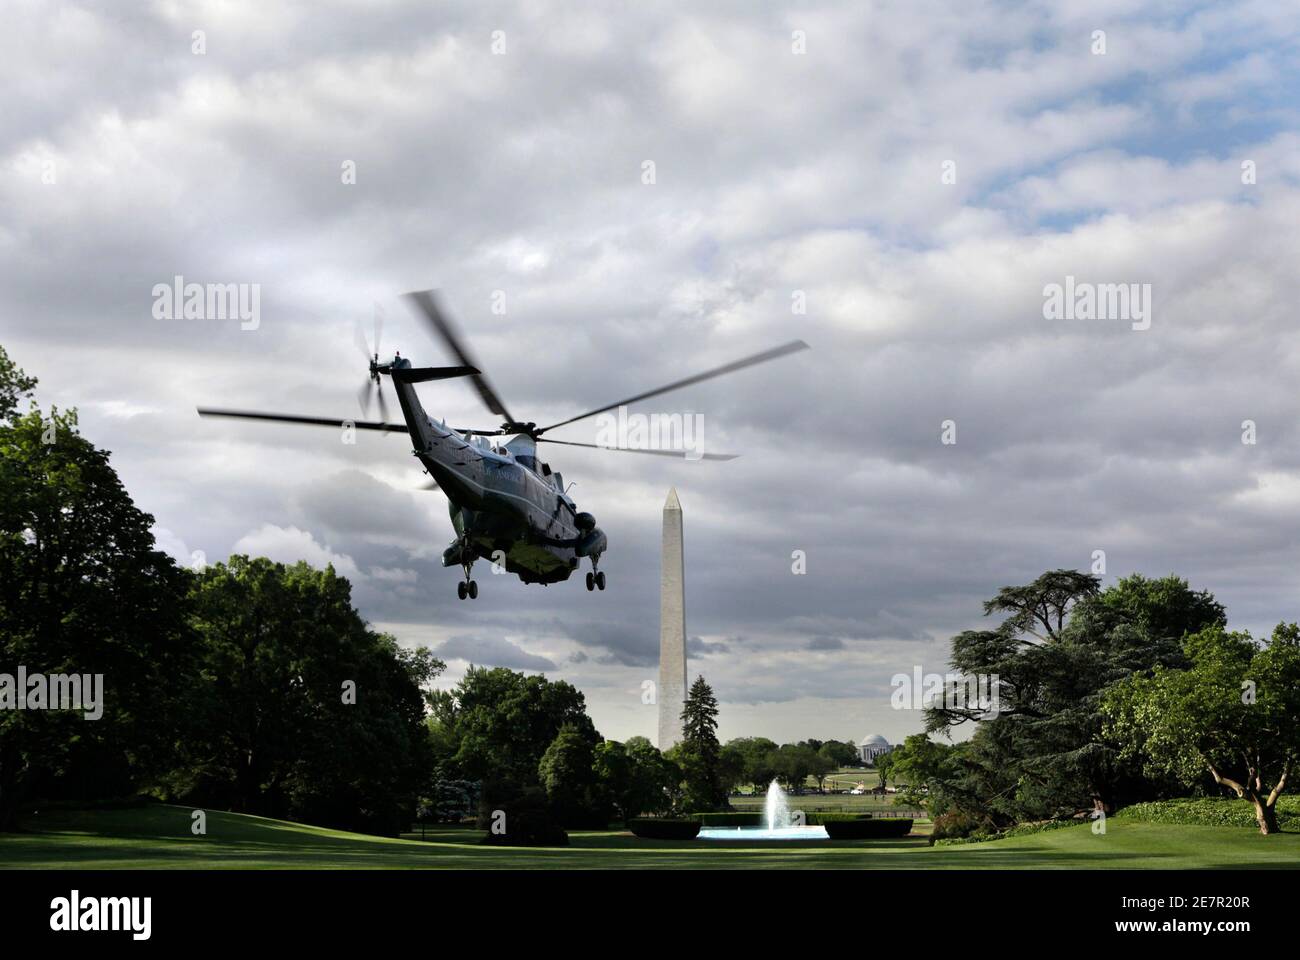 The Marine One helicopter with U.S. President Barack Obama on board departs from the White House in Washington in Virginia May 9, 2010. REUTERS/Yuri Gripas (UNITED STATES - Tags: POLITICS) Stock Photo